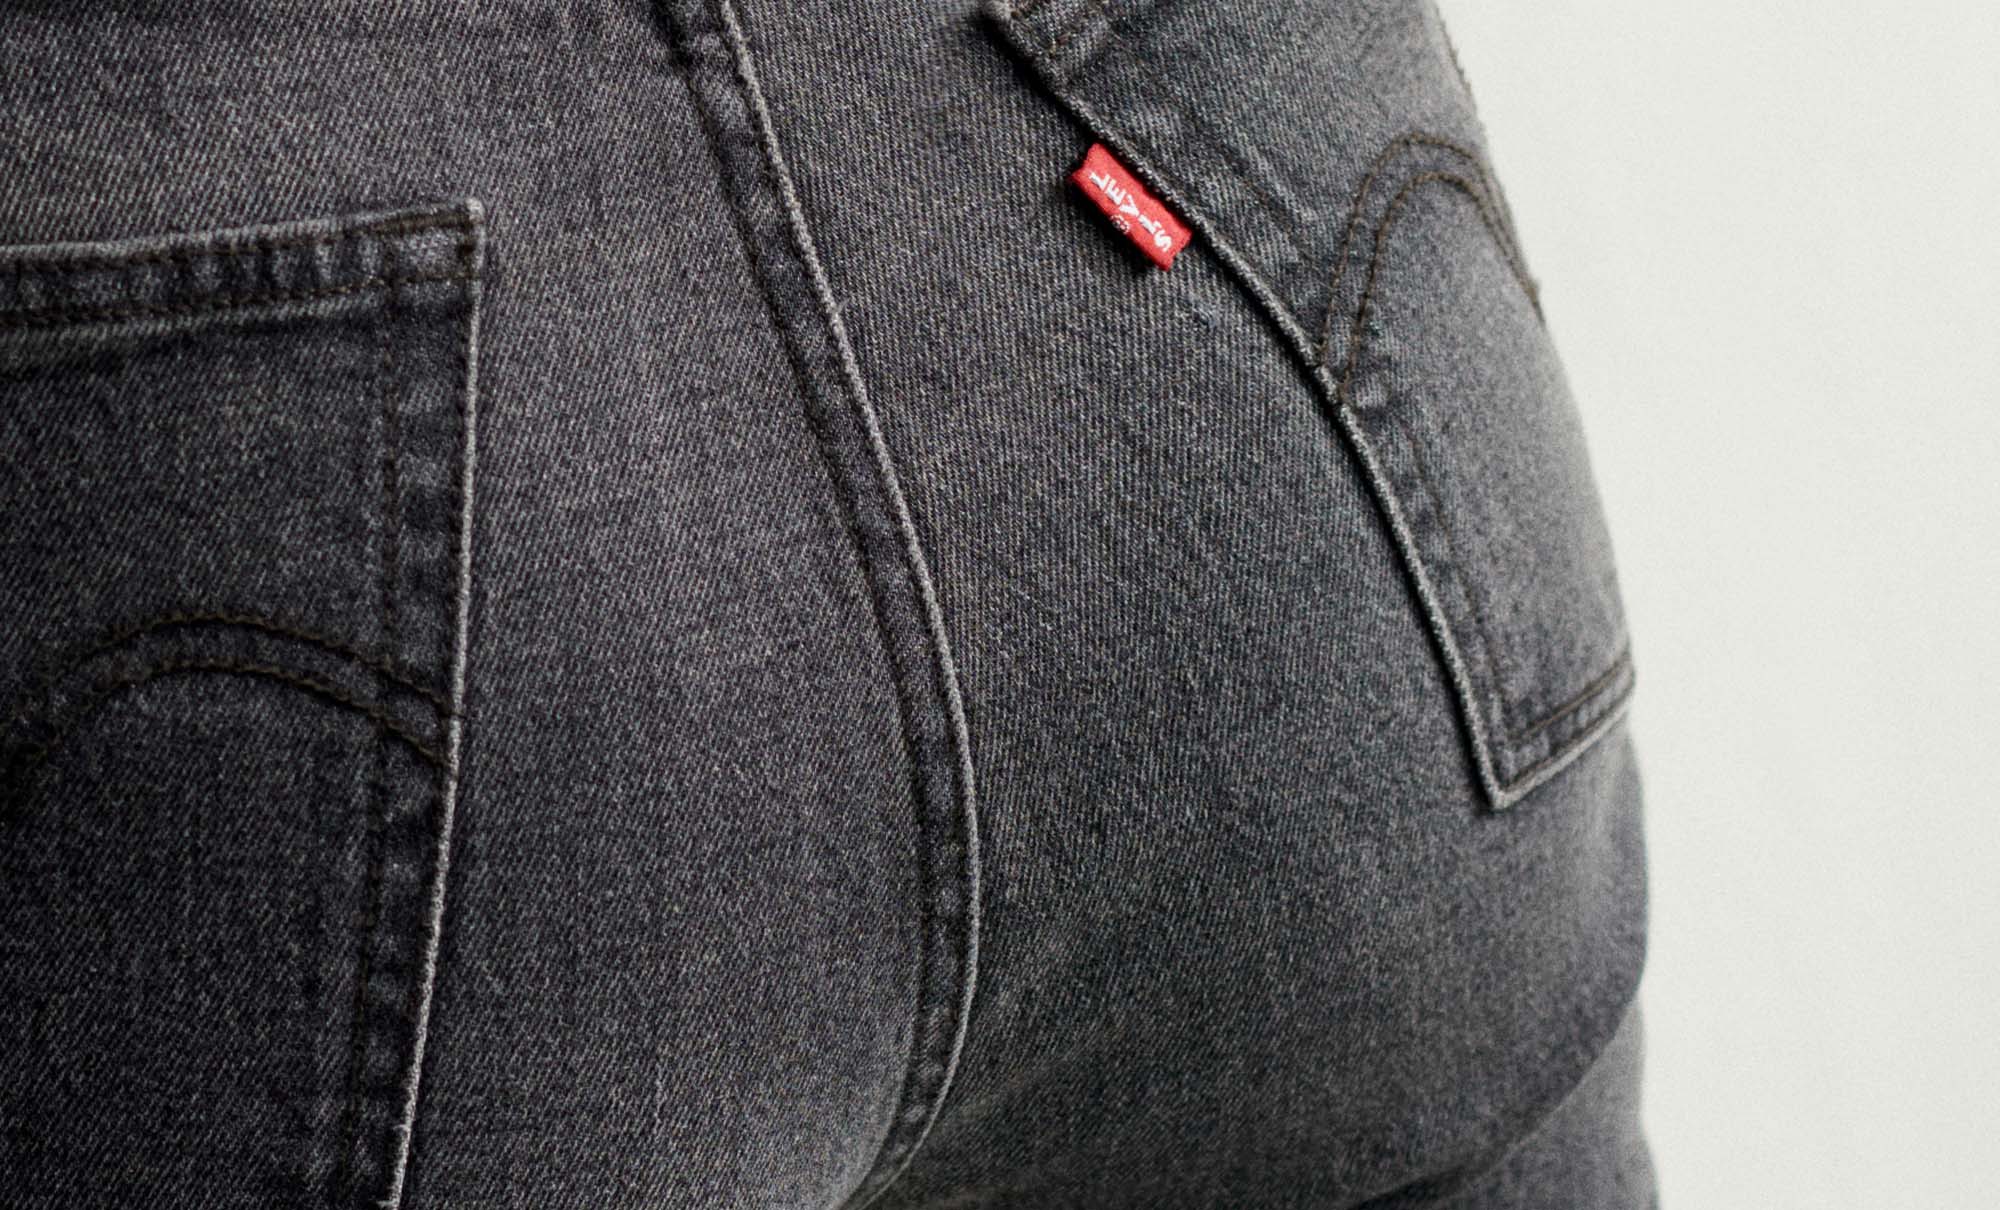 controller Opstand Stoel The True Story Behind the Debut of Black Jeans - Levi Strauss & Co : Levi  Strauss & Co